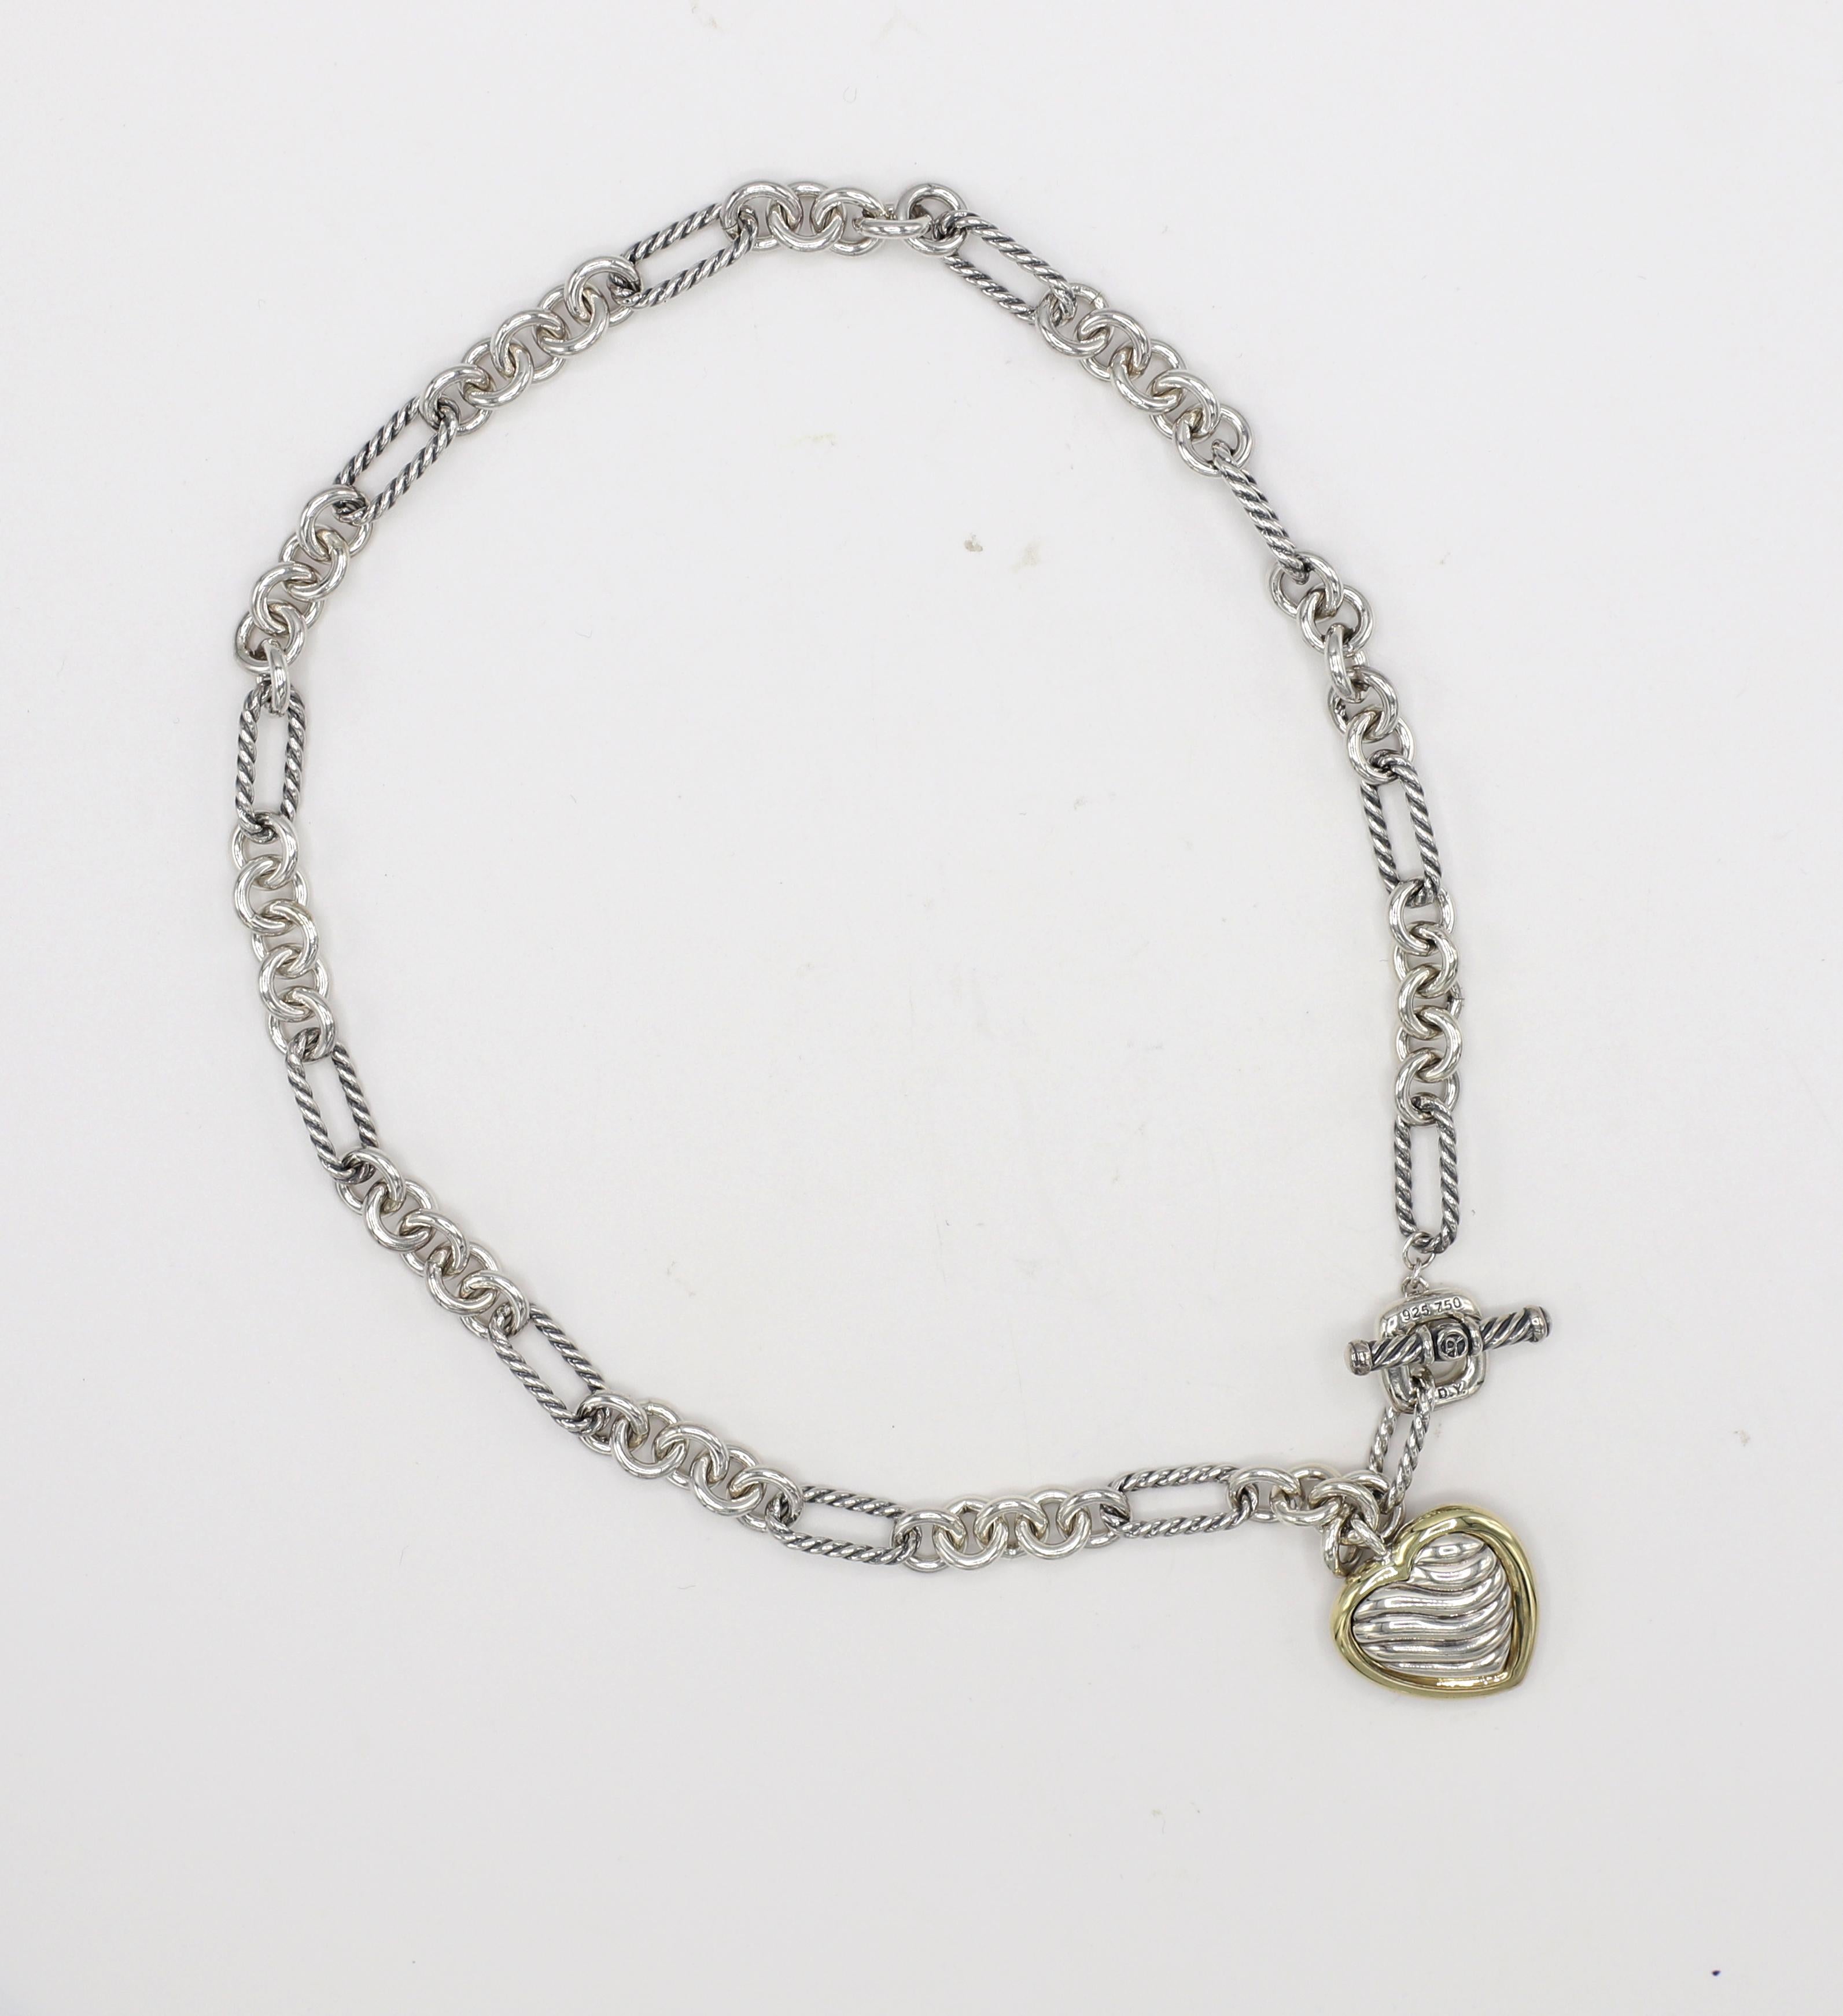 David Yurman Sterling Silver & Gold Cable Link Heart Charm Drop Necklace 
Metal: Sterling silver & 18k yellow gold
Weight: 45 grams
Heart: 20 x 20mm
Length: 16 inches
Clasp: Toggle

